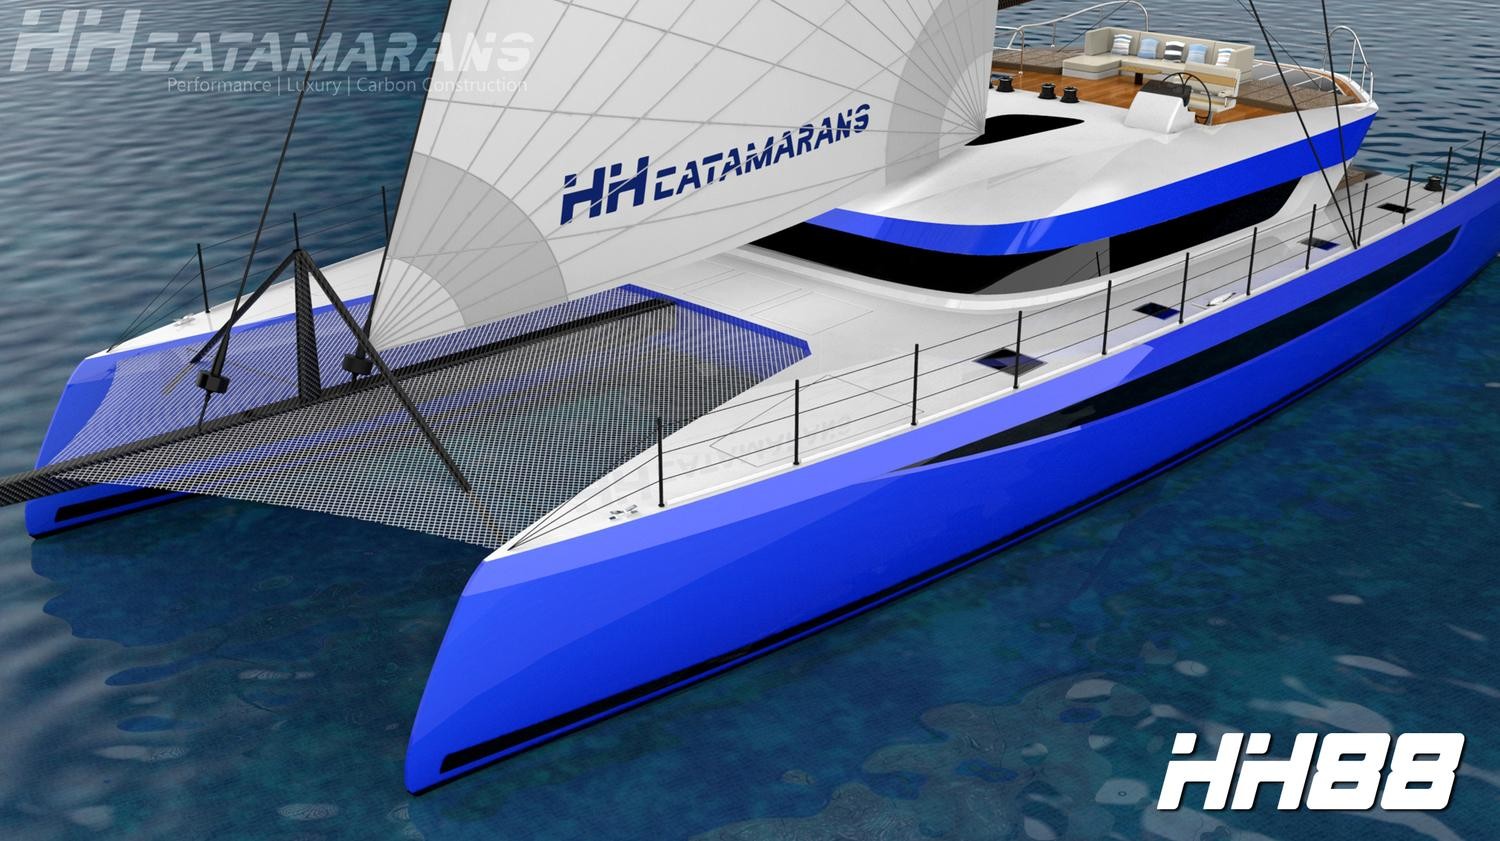 Hudson Yacht Group is now ready for its most ambitious project to date: the new HH 88